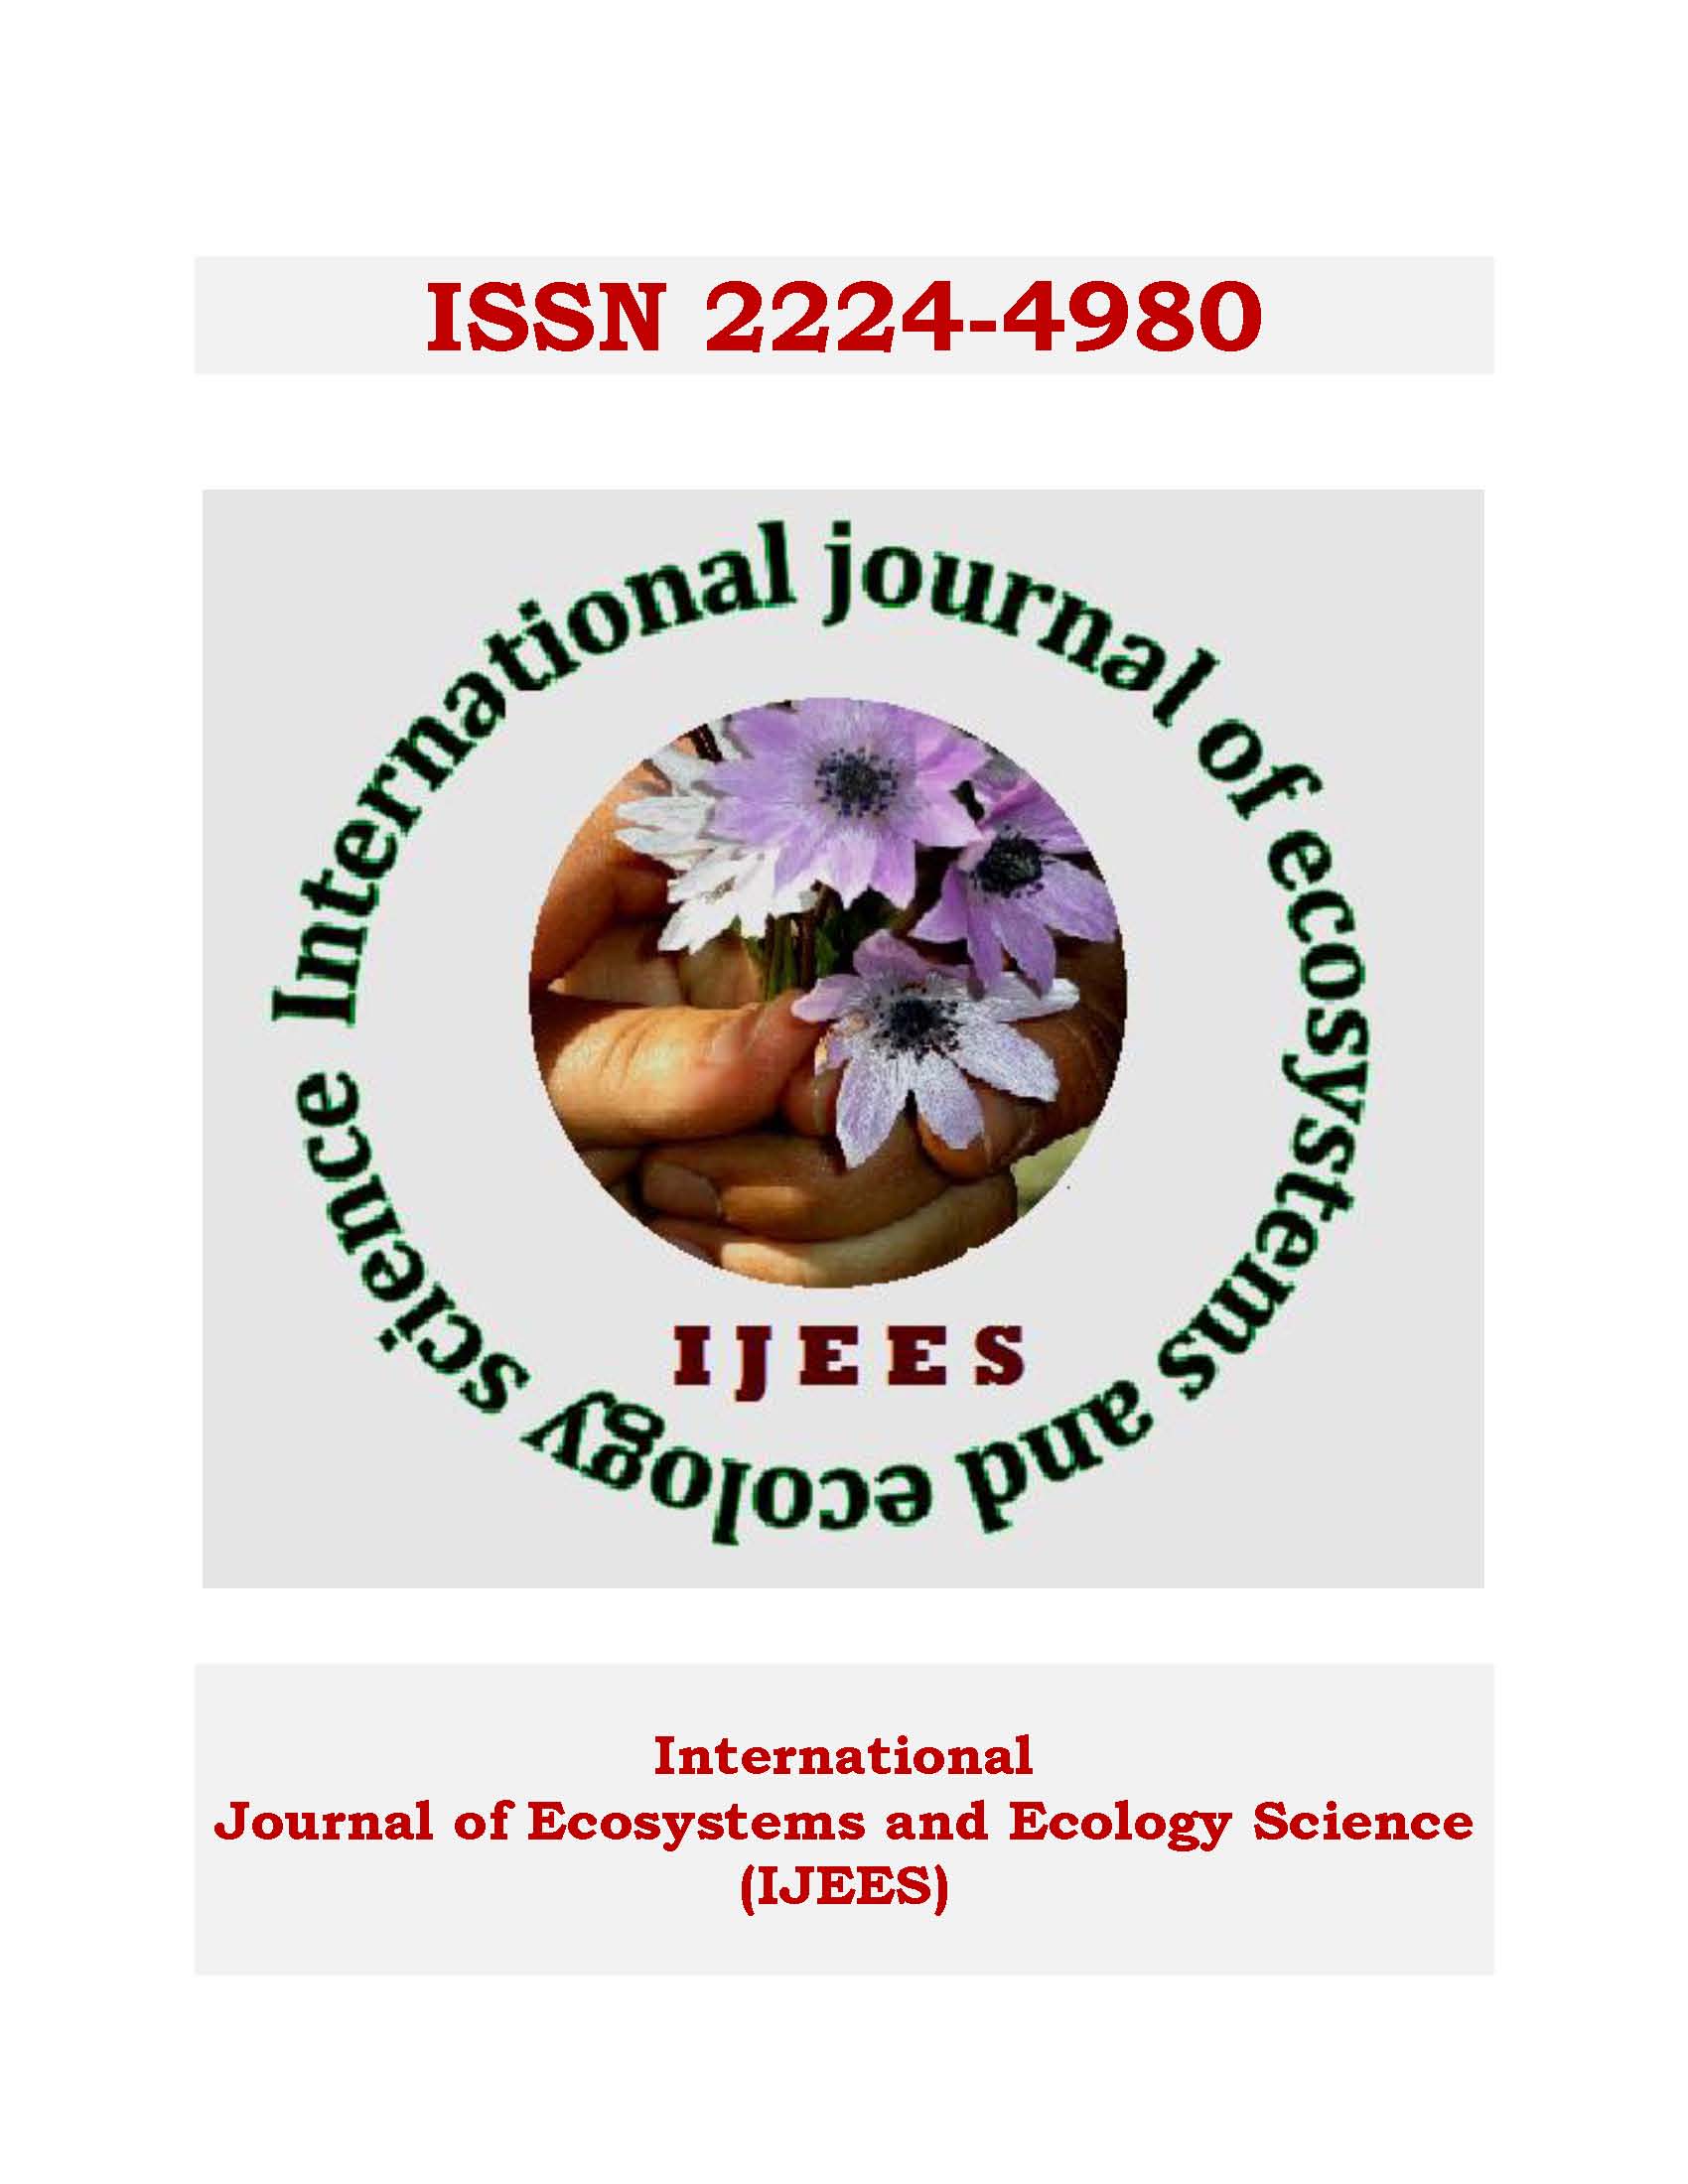  International journal of ecosystems and ecology science (IJEES)